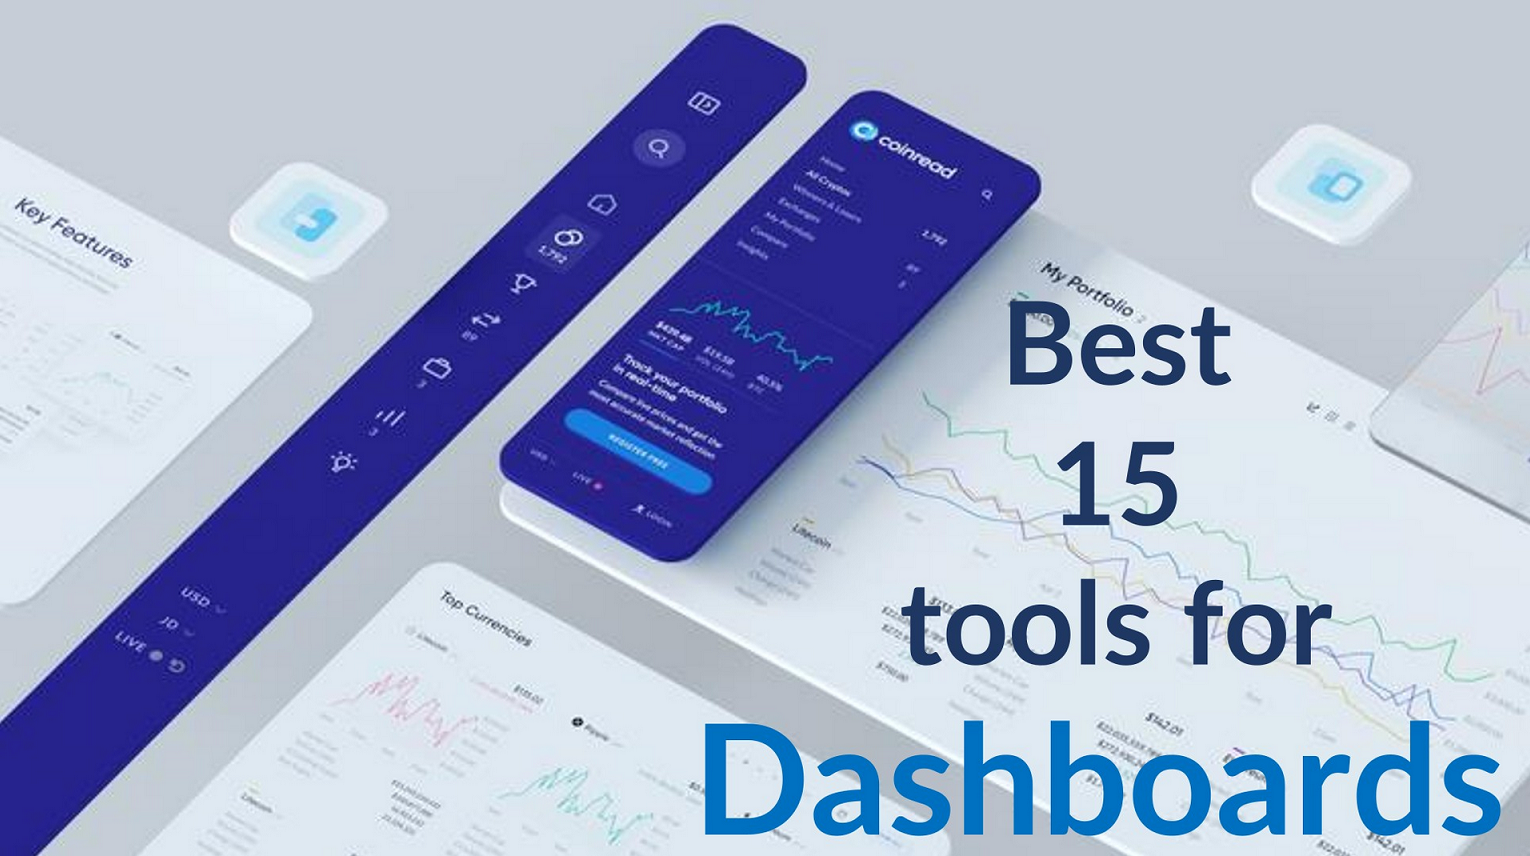 Top 15 Dashboards Tools